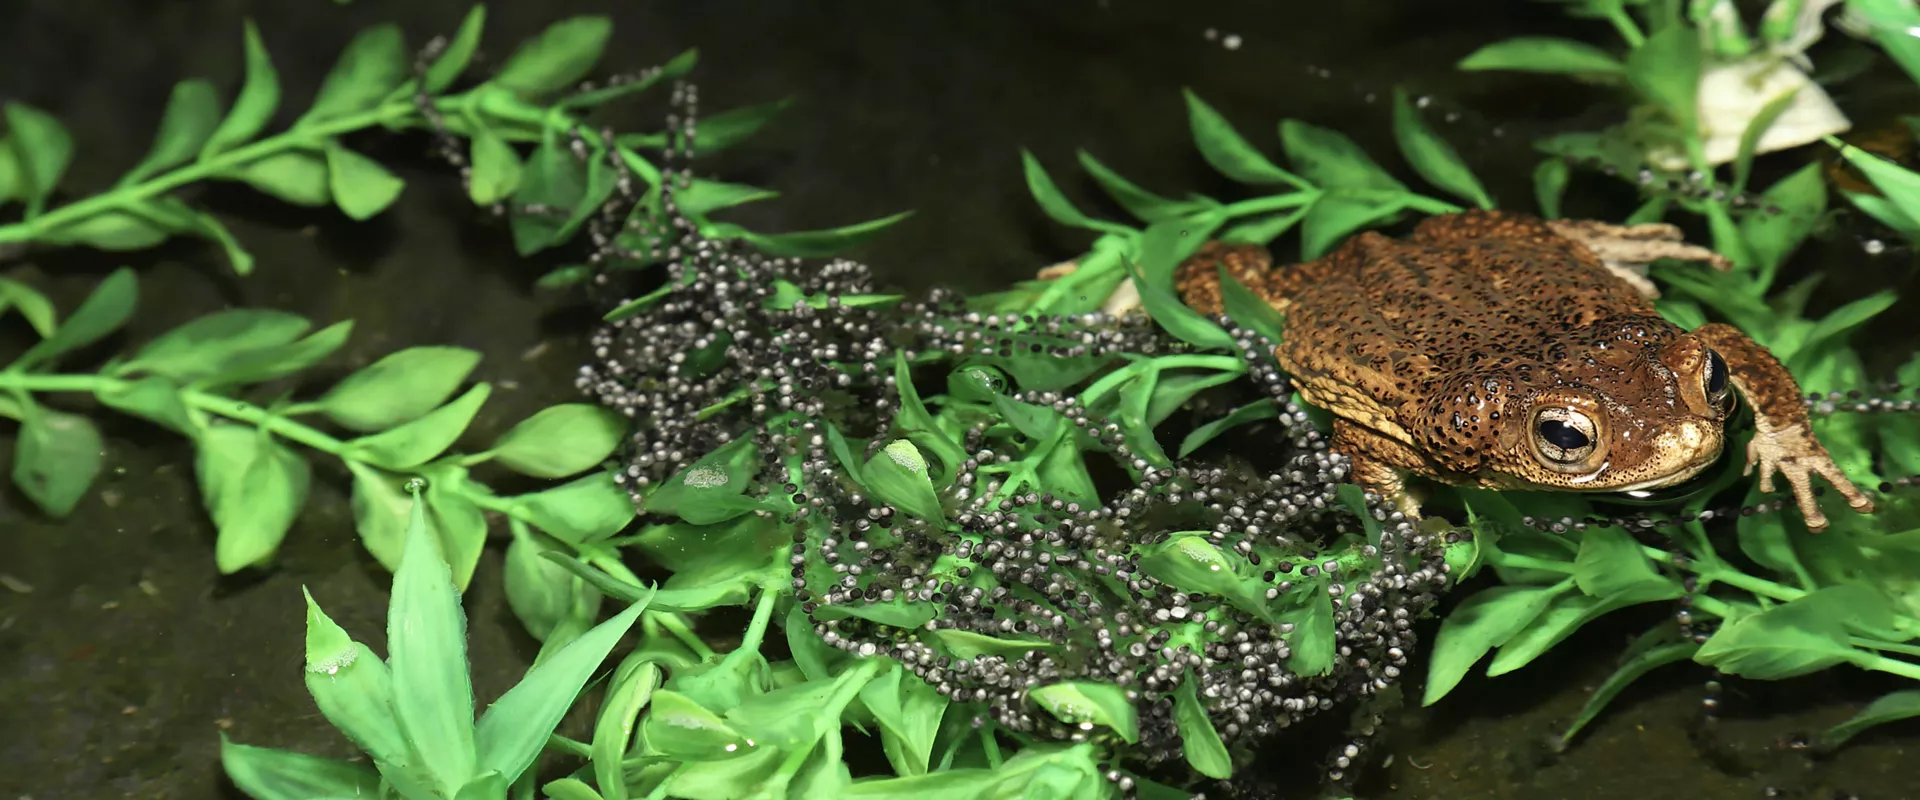 Giving Puerto Rican Crested Toads a Headstart